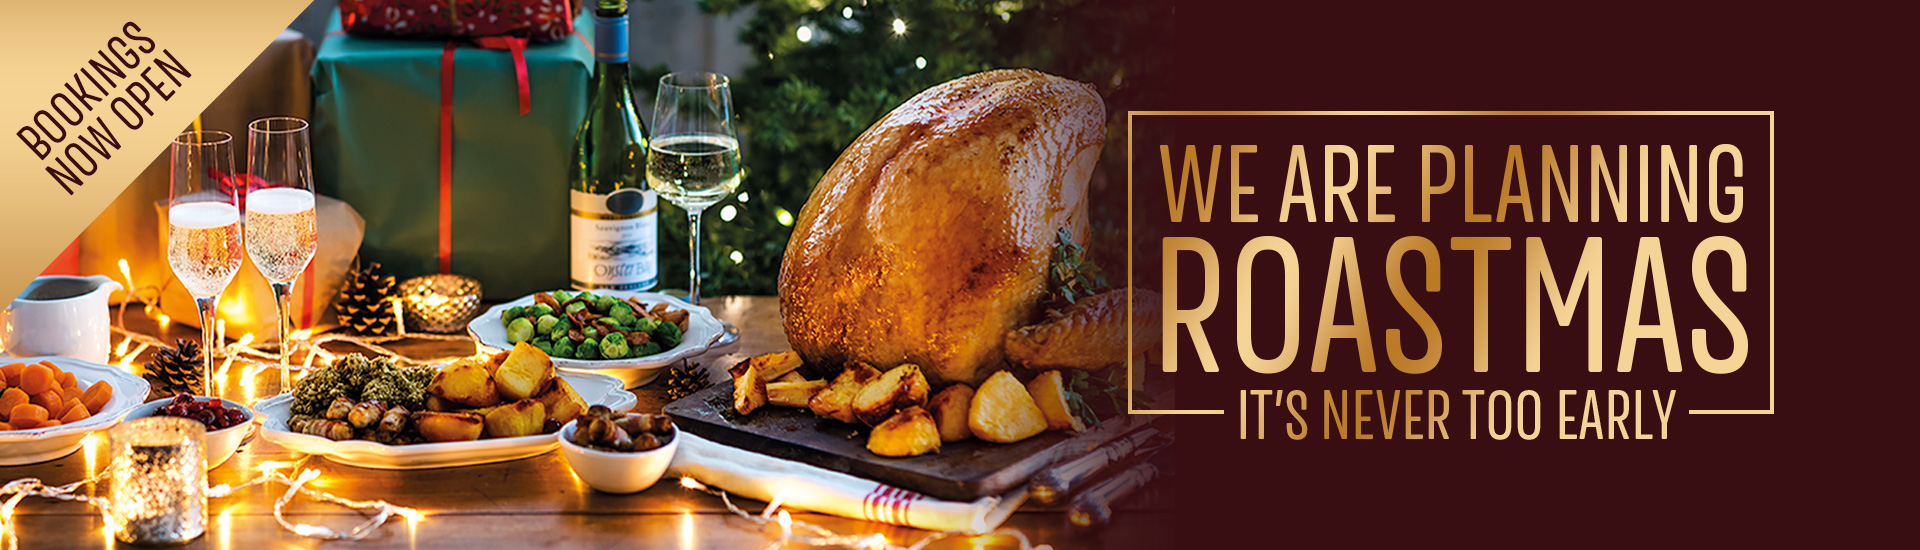 Christmas 2022 at your local Toby Carvery Worthing | Home of the Roast